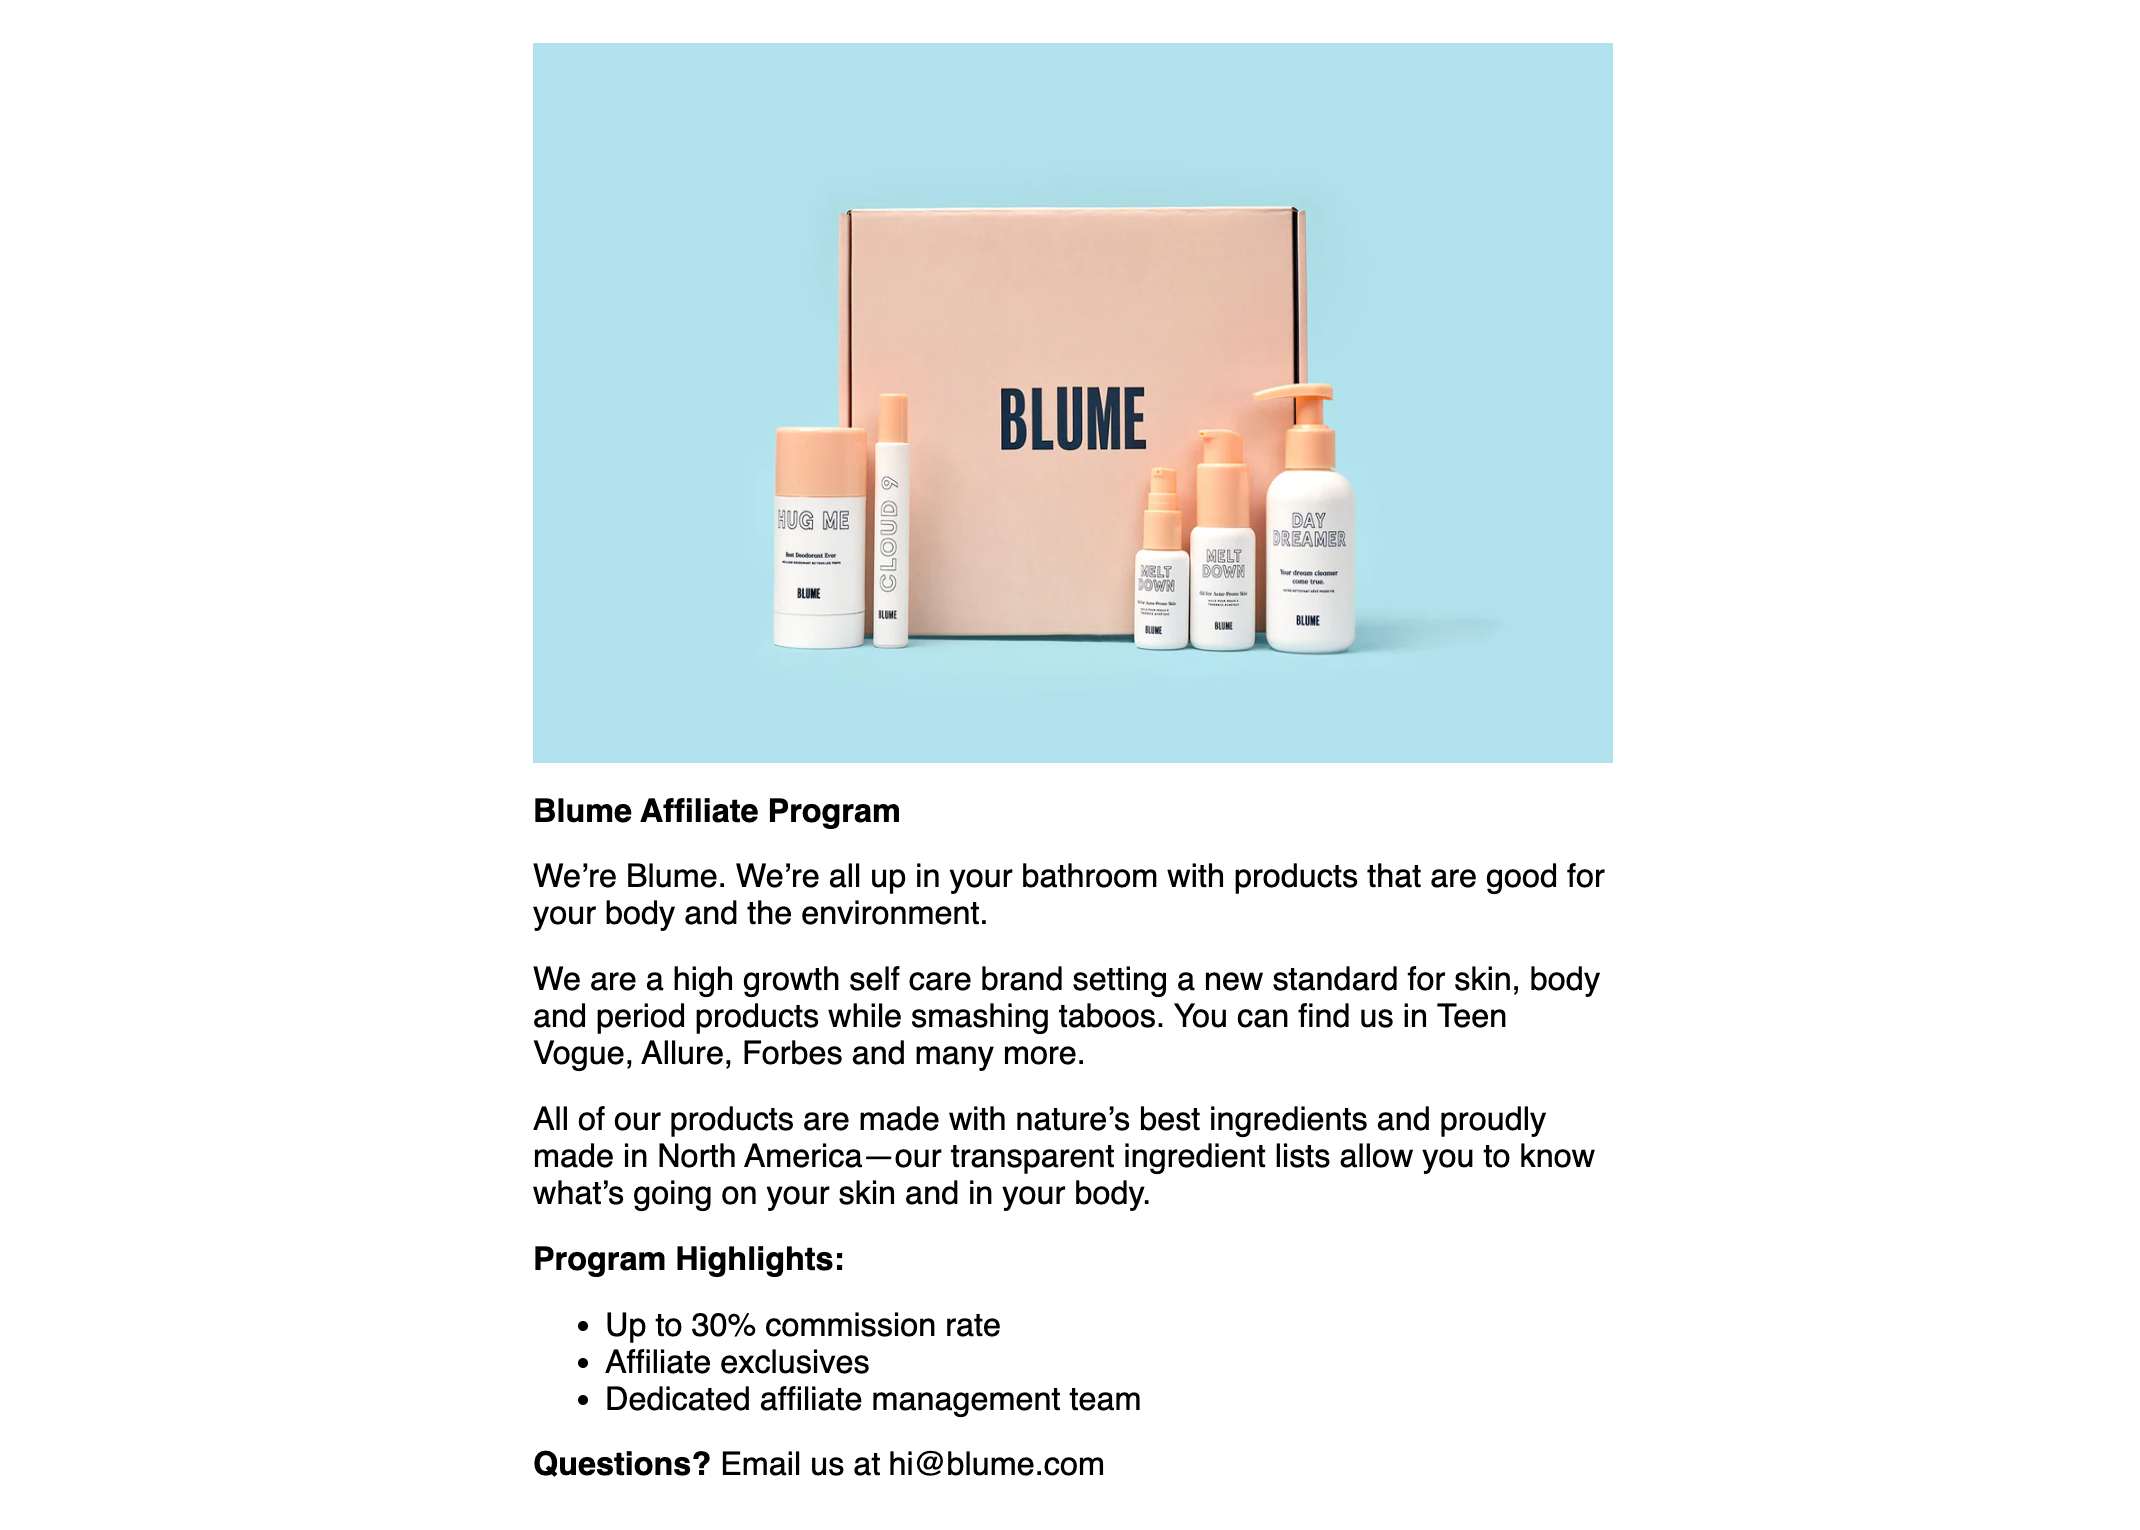 Blume affiliate program offer with products.